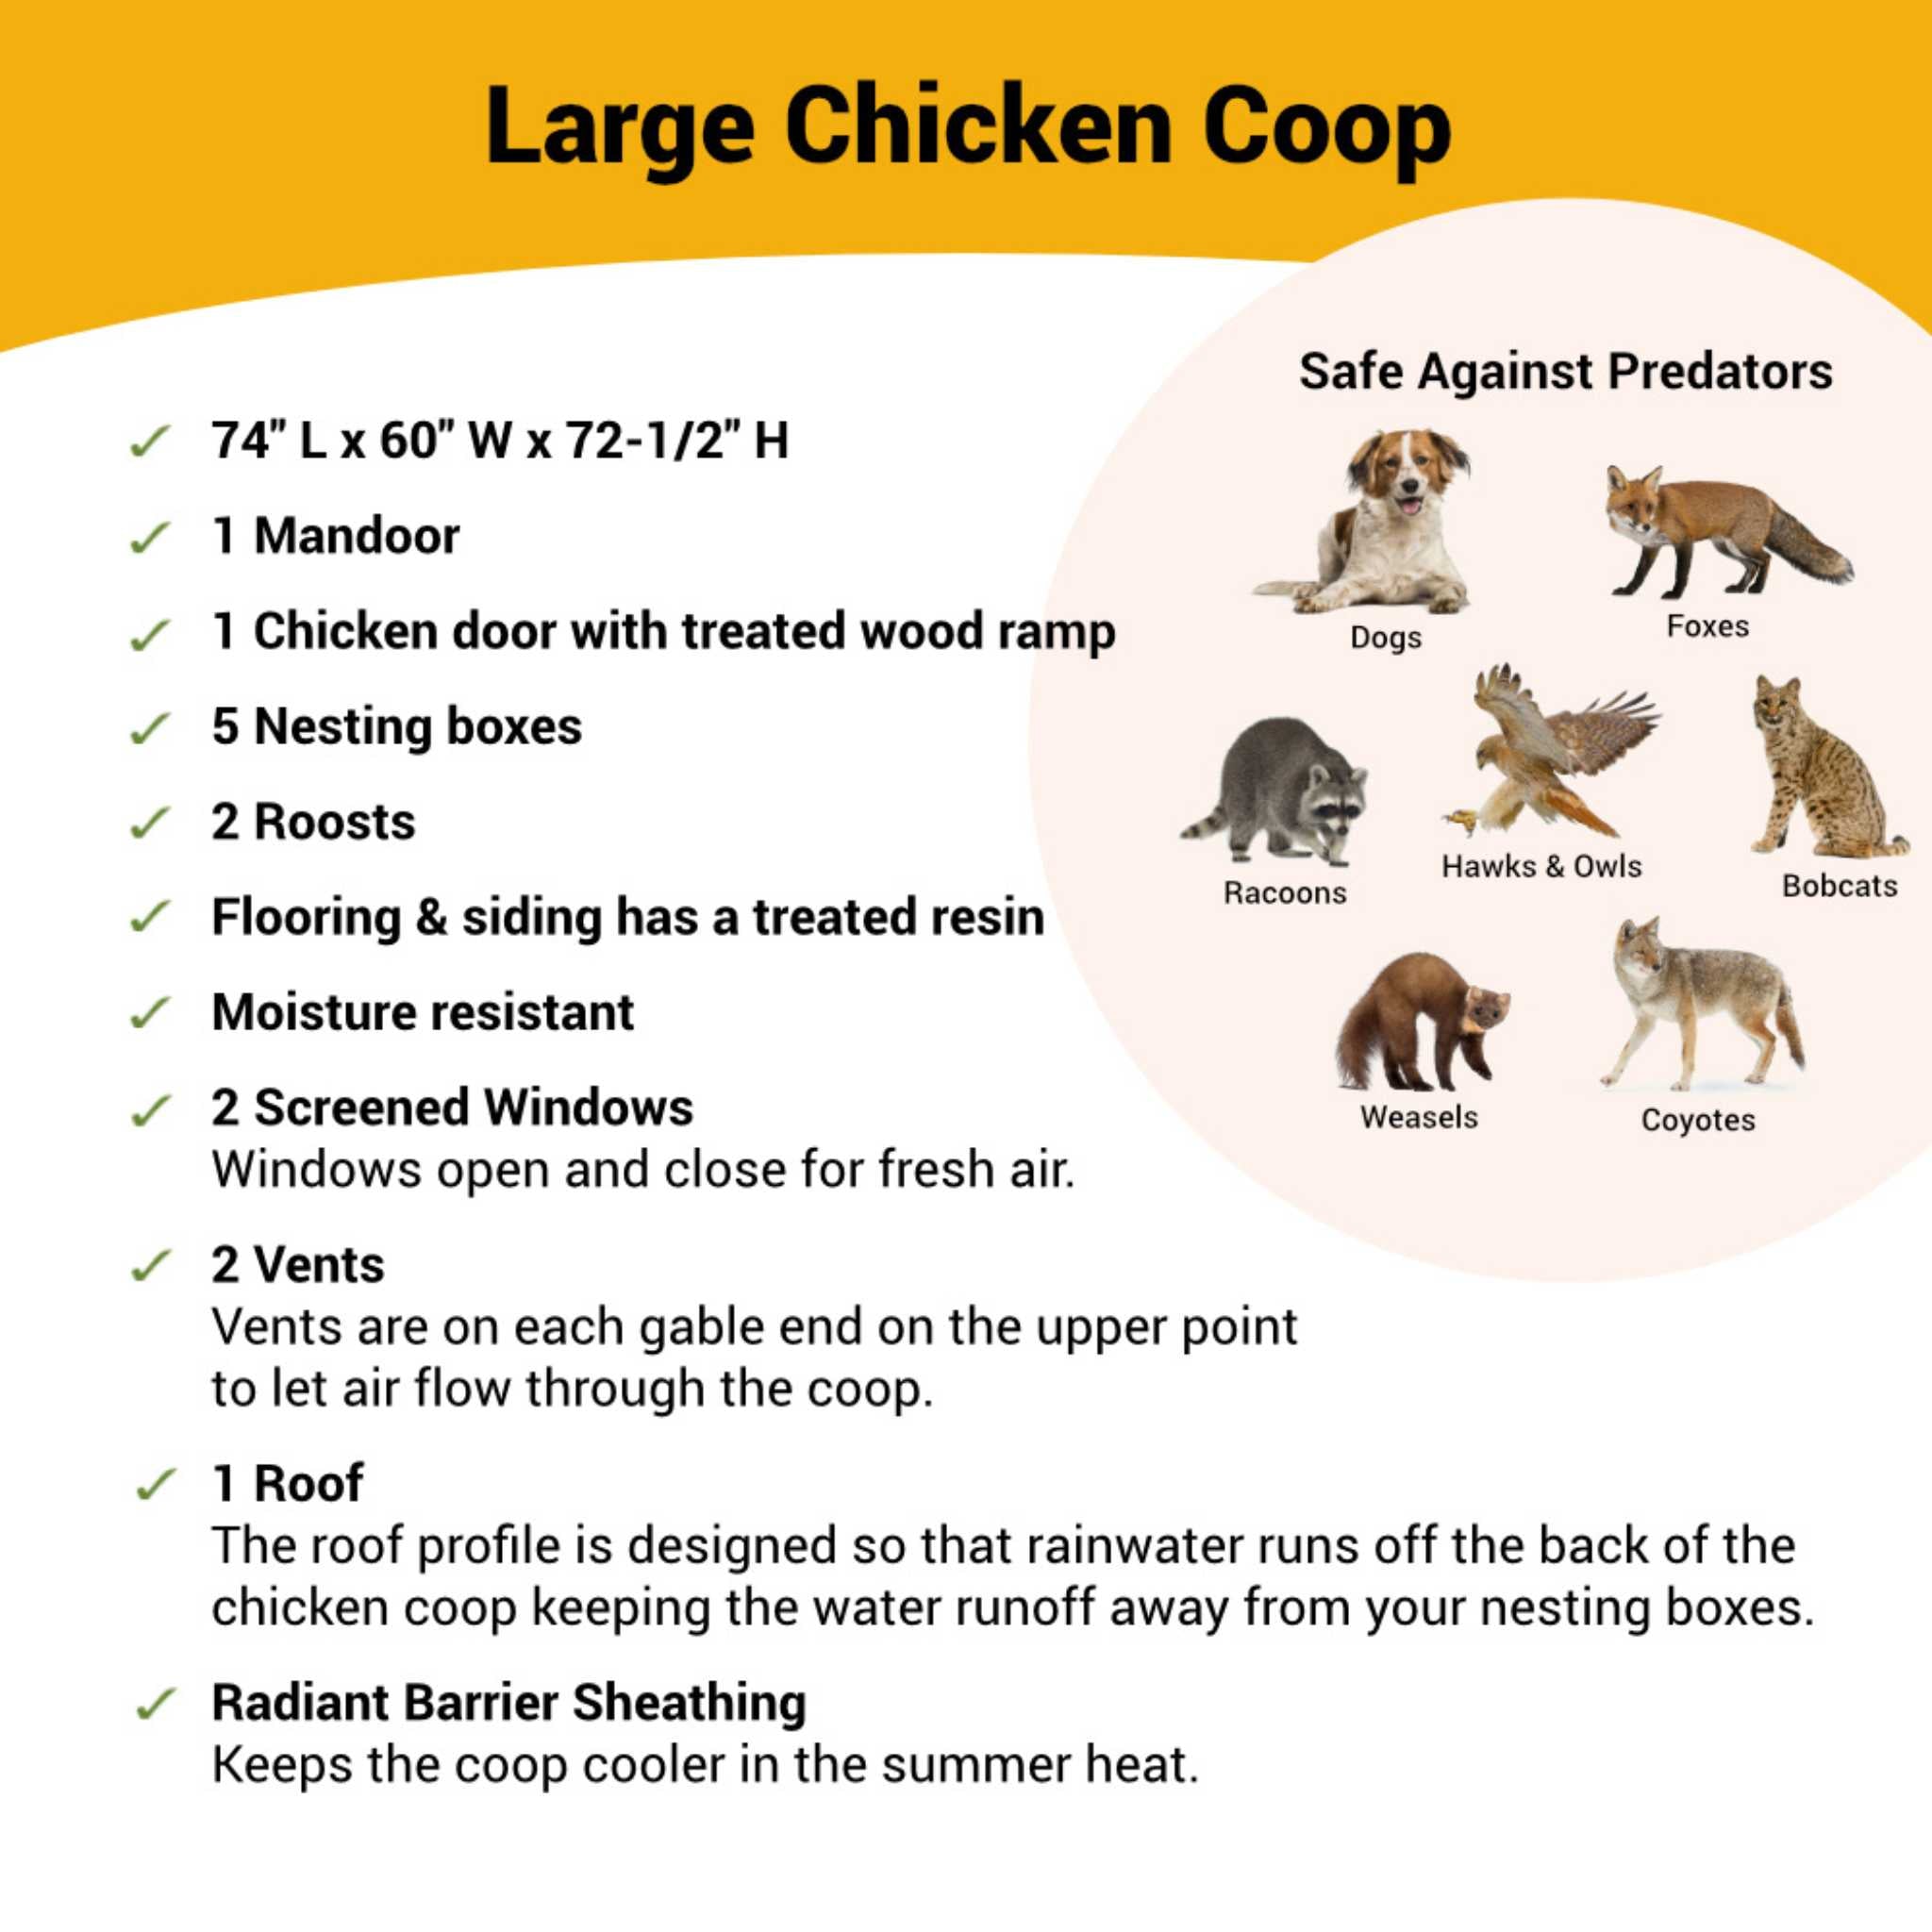 Hatching Time OverEZ Large chicken coop infographic shows coop is safe against predators. dimensions and details are also shown in image for Large chicken coop.